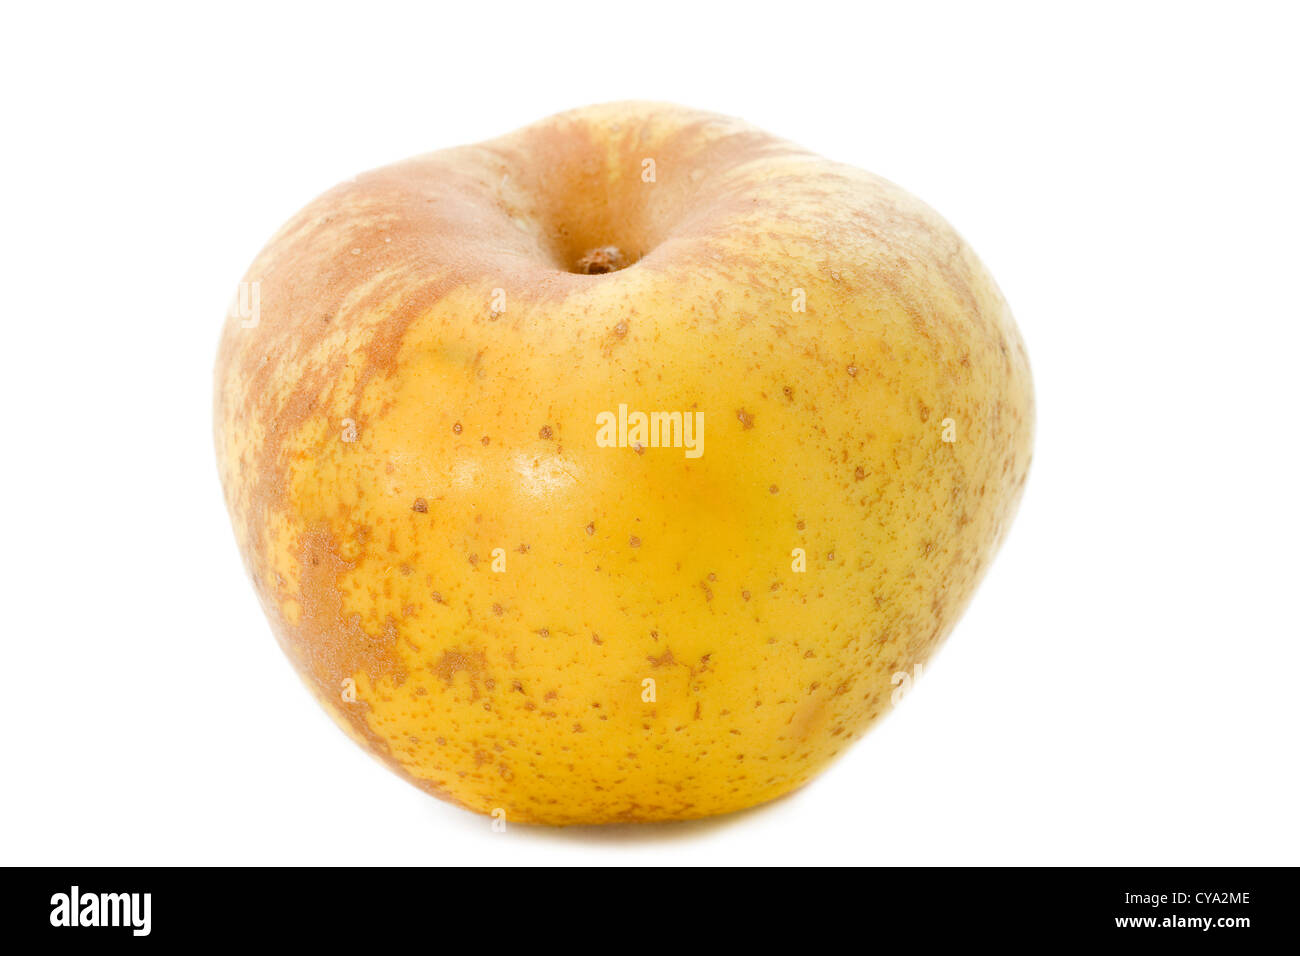 Golden russet apple in front of white background Stock Photo